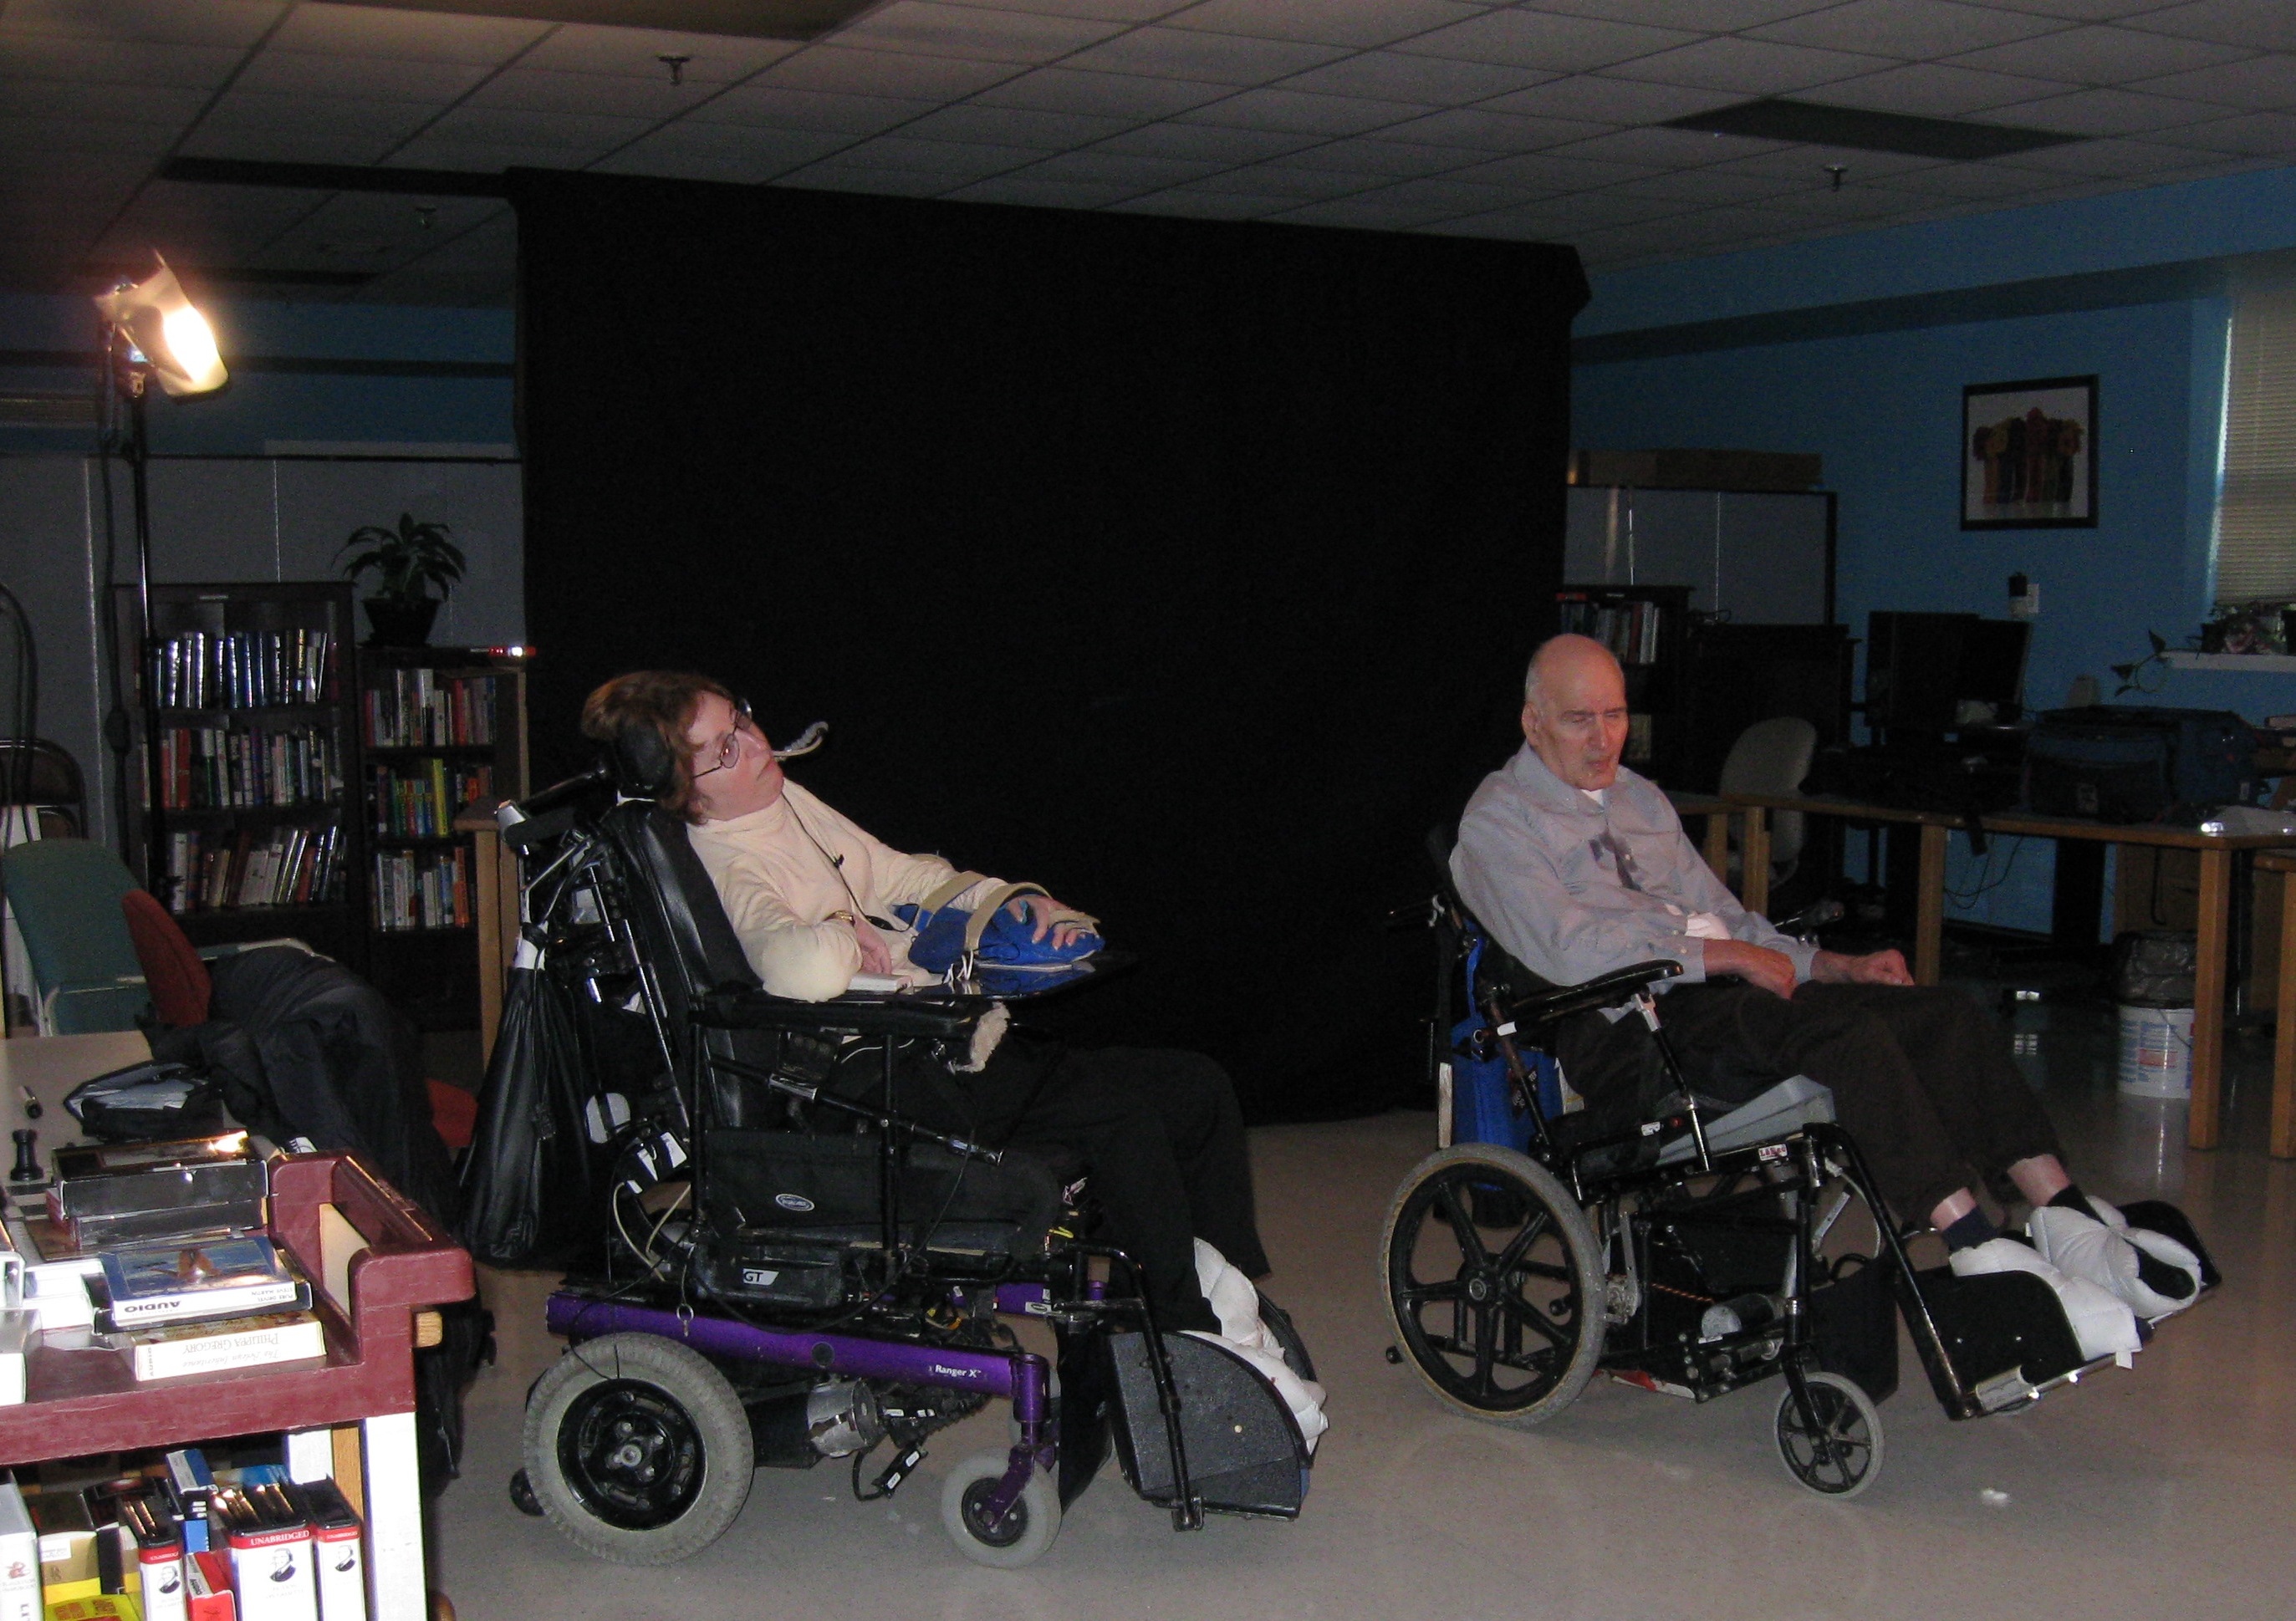 Ilene Myers and Robinson Fredenthal sit in wheelchairs before a black backdrop.